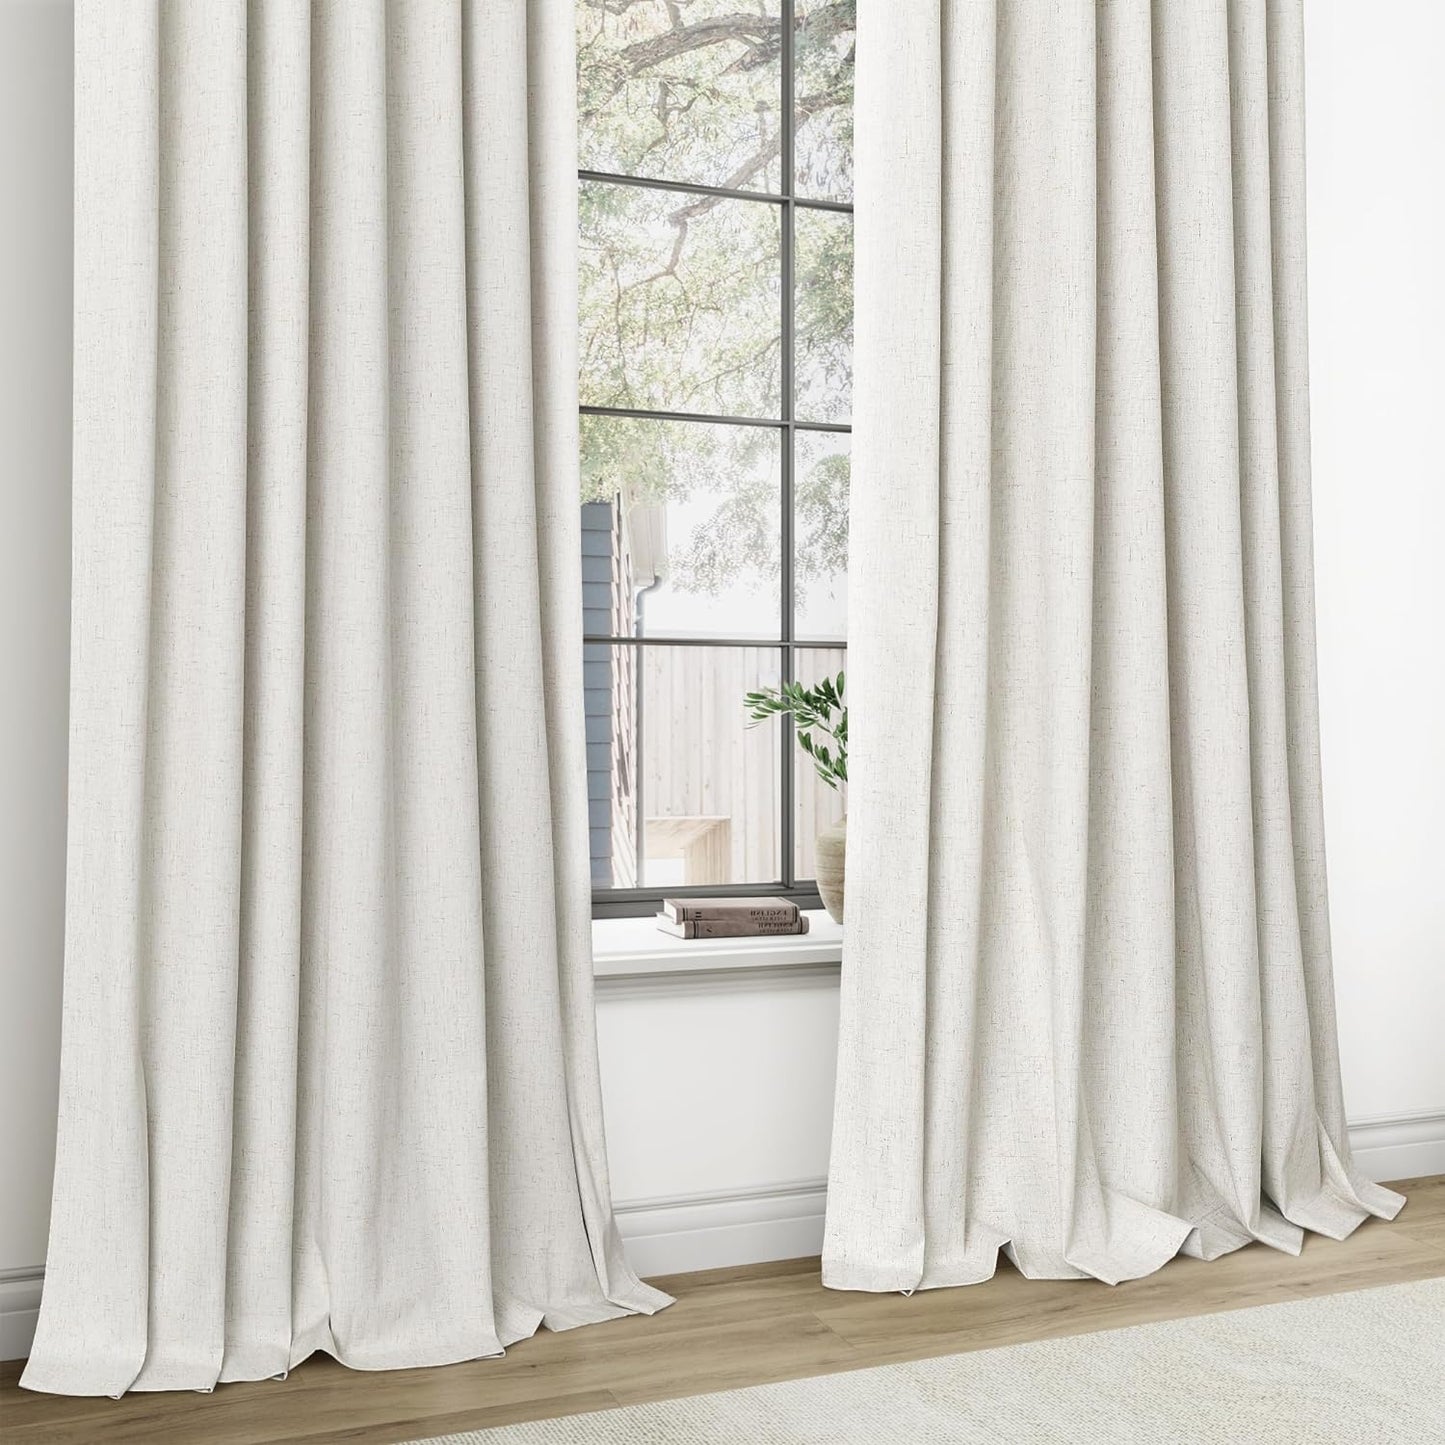 Joywell Cream Ivory Linen 100% Blackout Curtains 84 Inches Long,Pinch Pleated Back Tab Drapes with Hooks Light Blocking Thermal Insulated for Bedroom Living Room,W40 X L84,Natural Beige,2 Panels  Joywell   